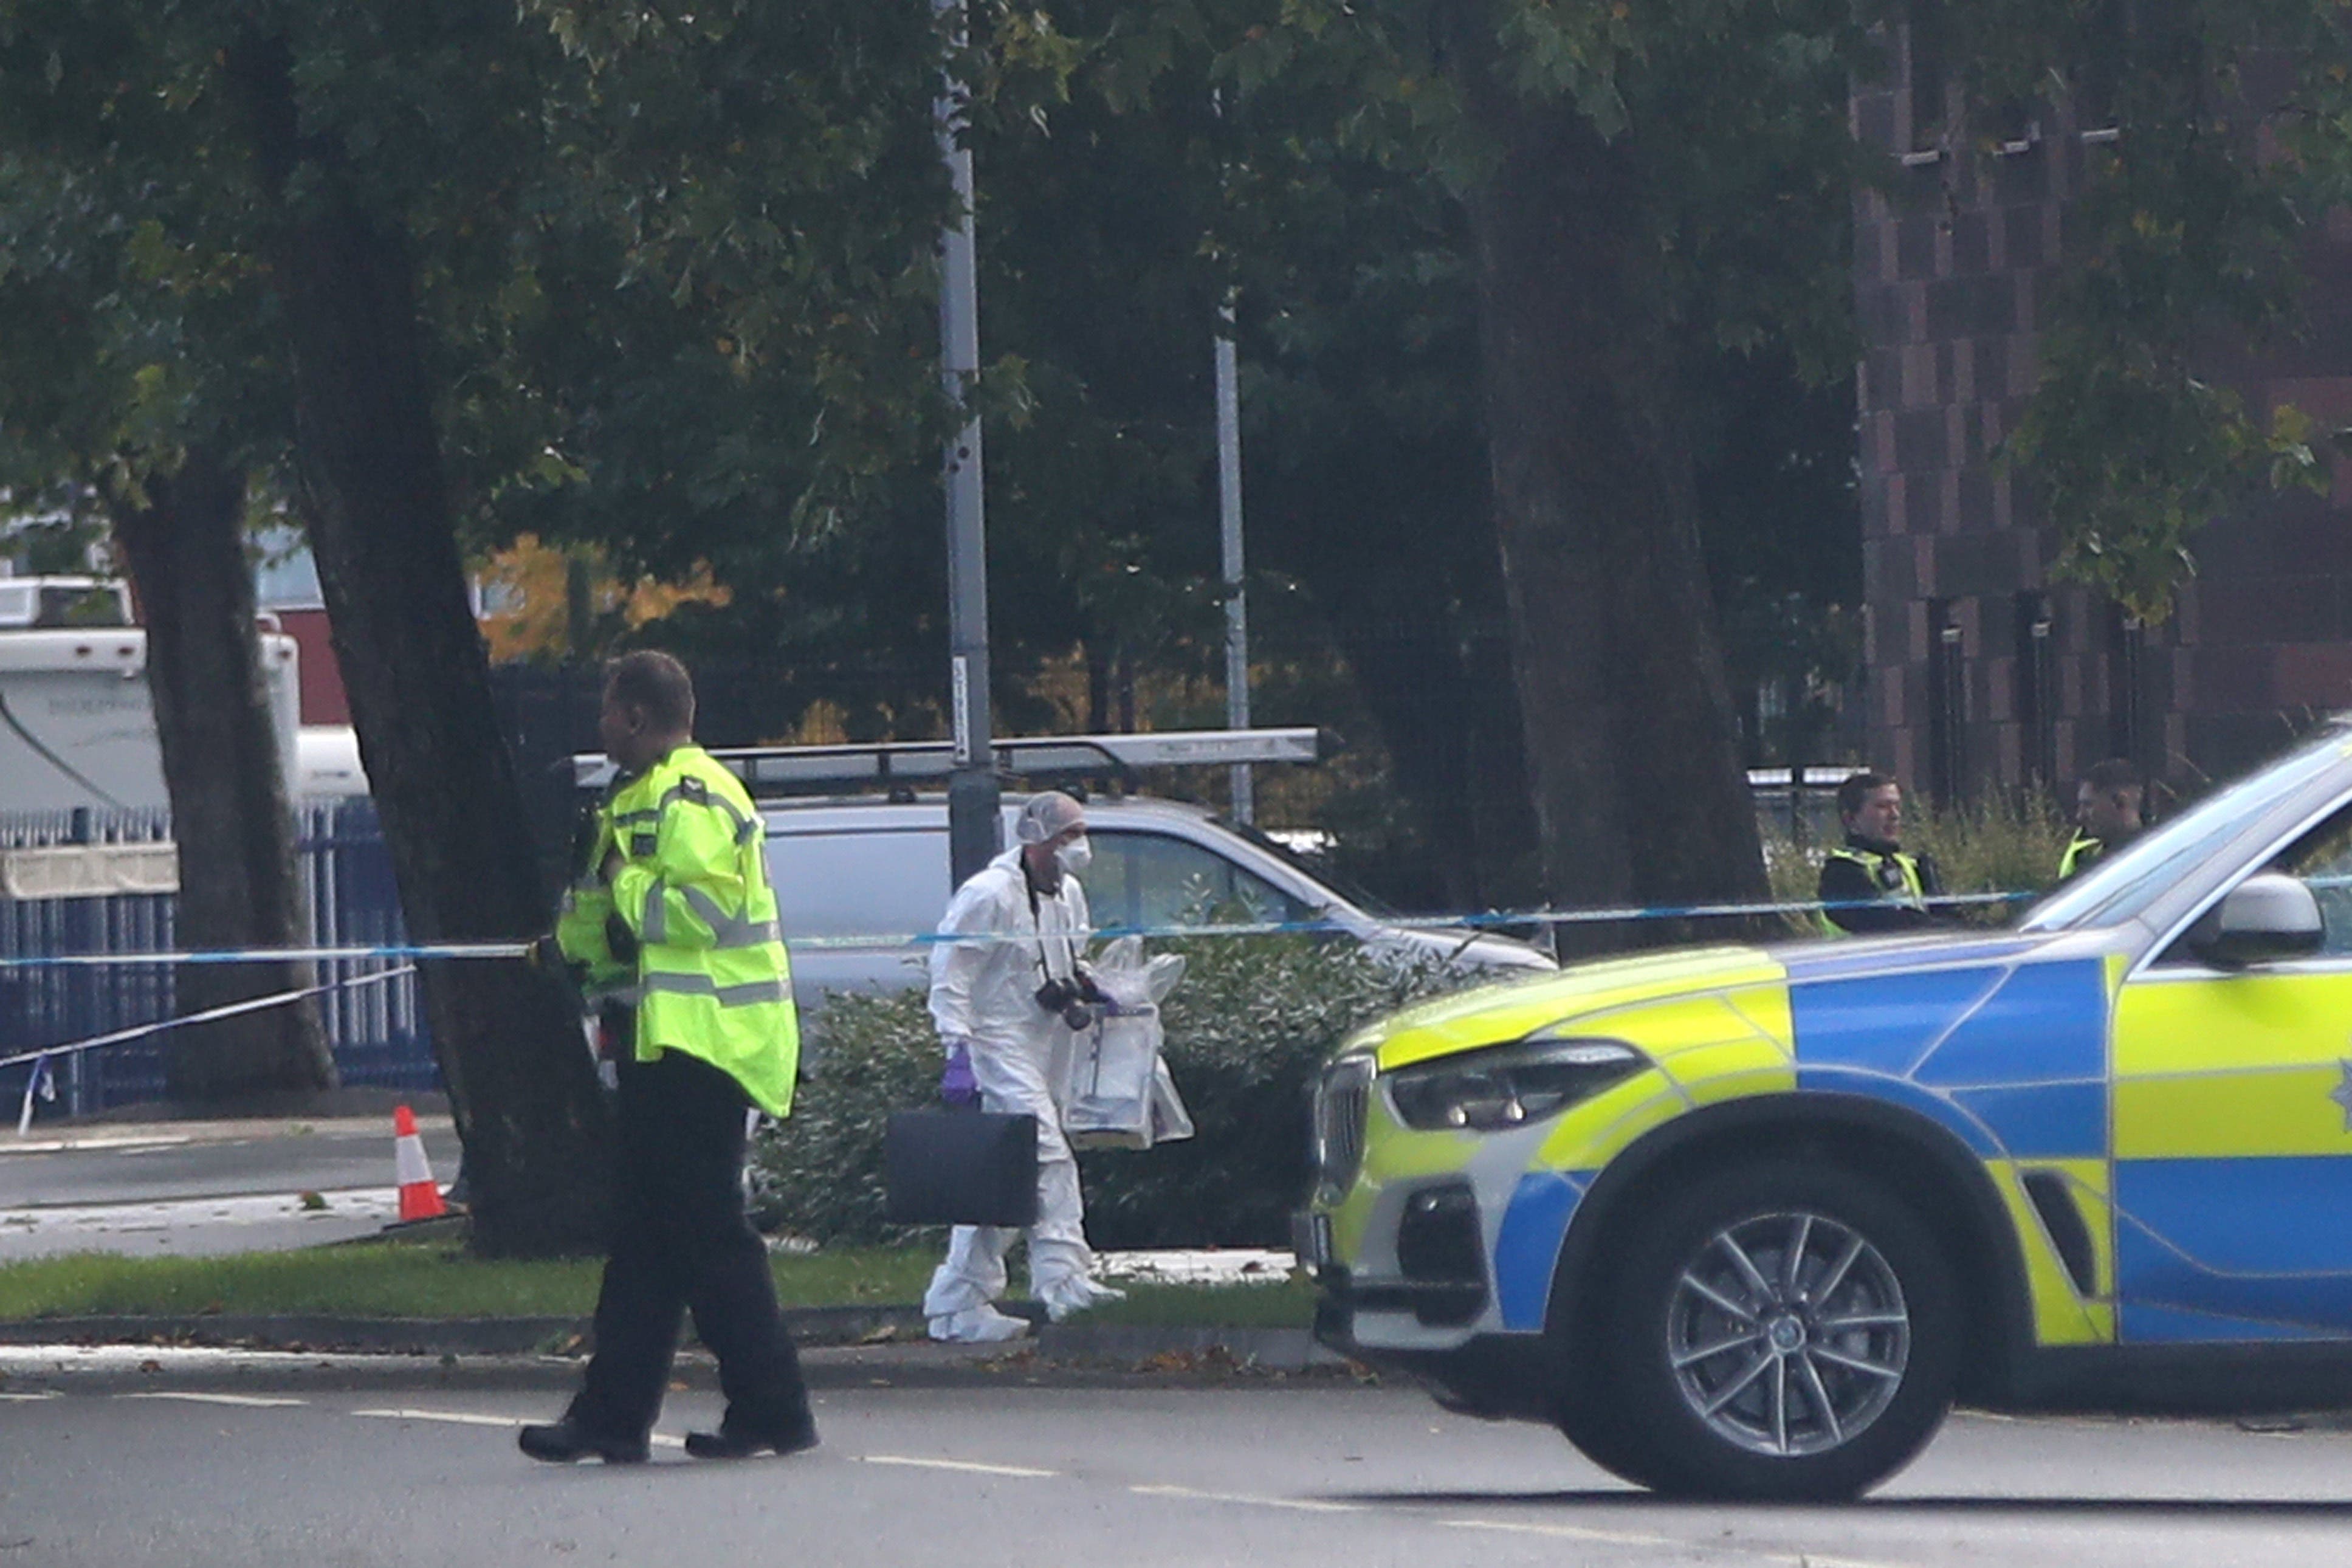 The scene outside Ascot Drive police station in Derby where a man was fatally shot by armed officers on October 7 (Simon Marper/PA)